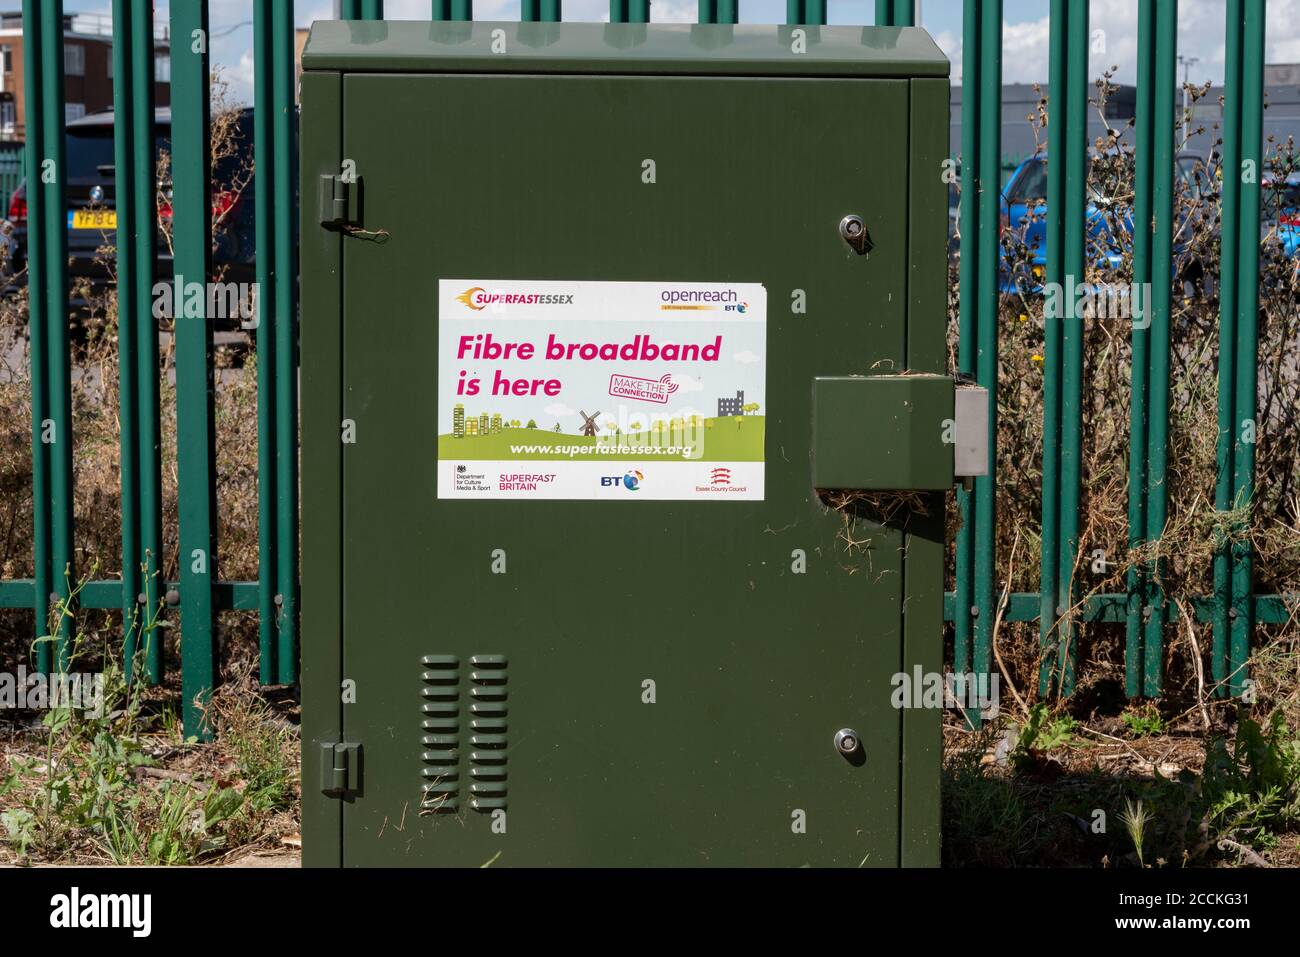 Fibre broadband notice sign on junction box. Superfast Essex. Openreach BT. Superfast Britain. Essex County Council. DCMS. Communications Stock Photo